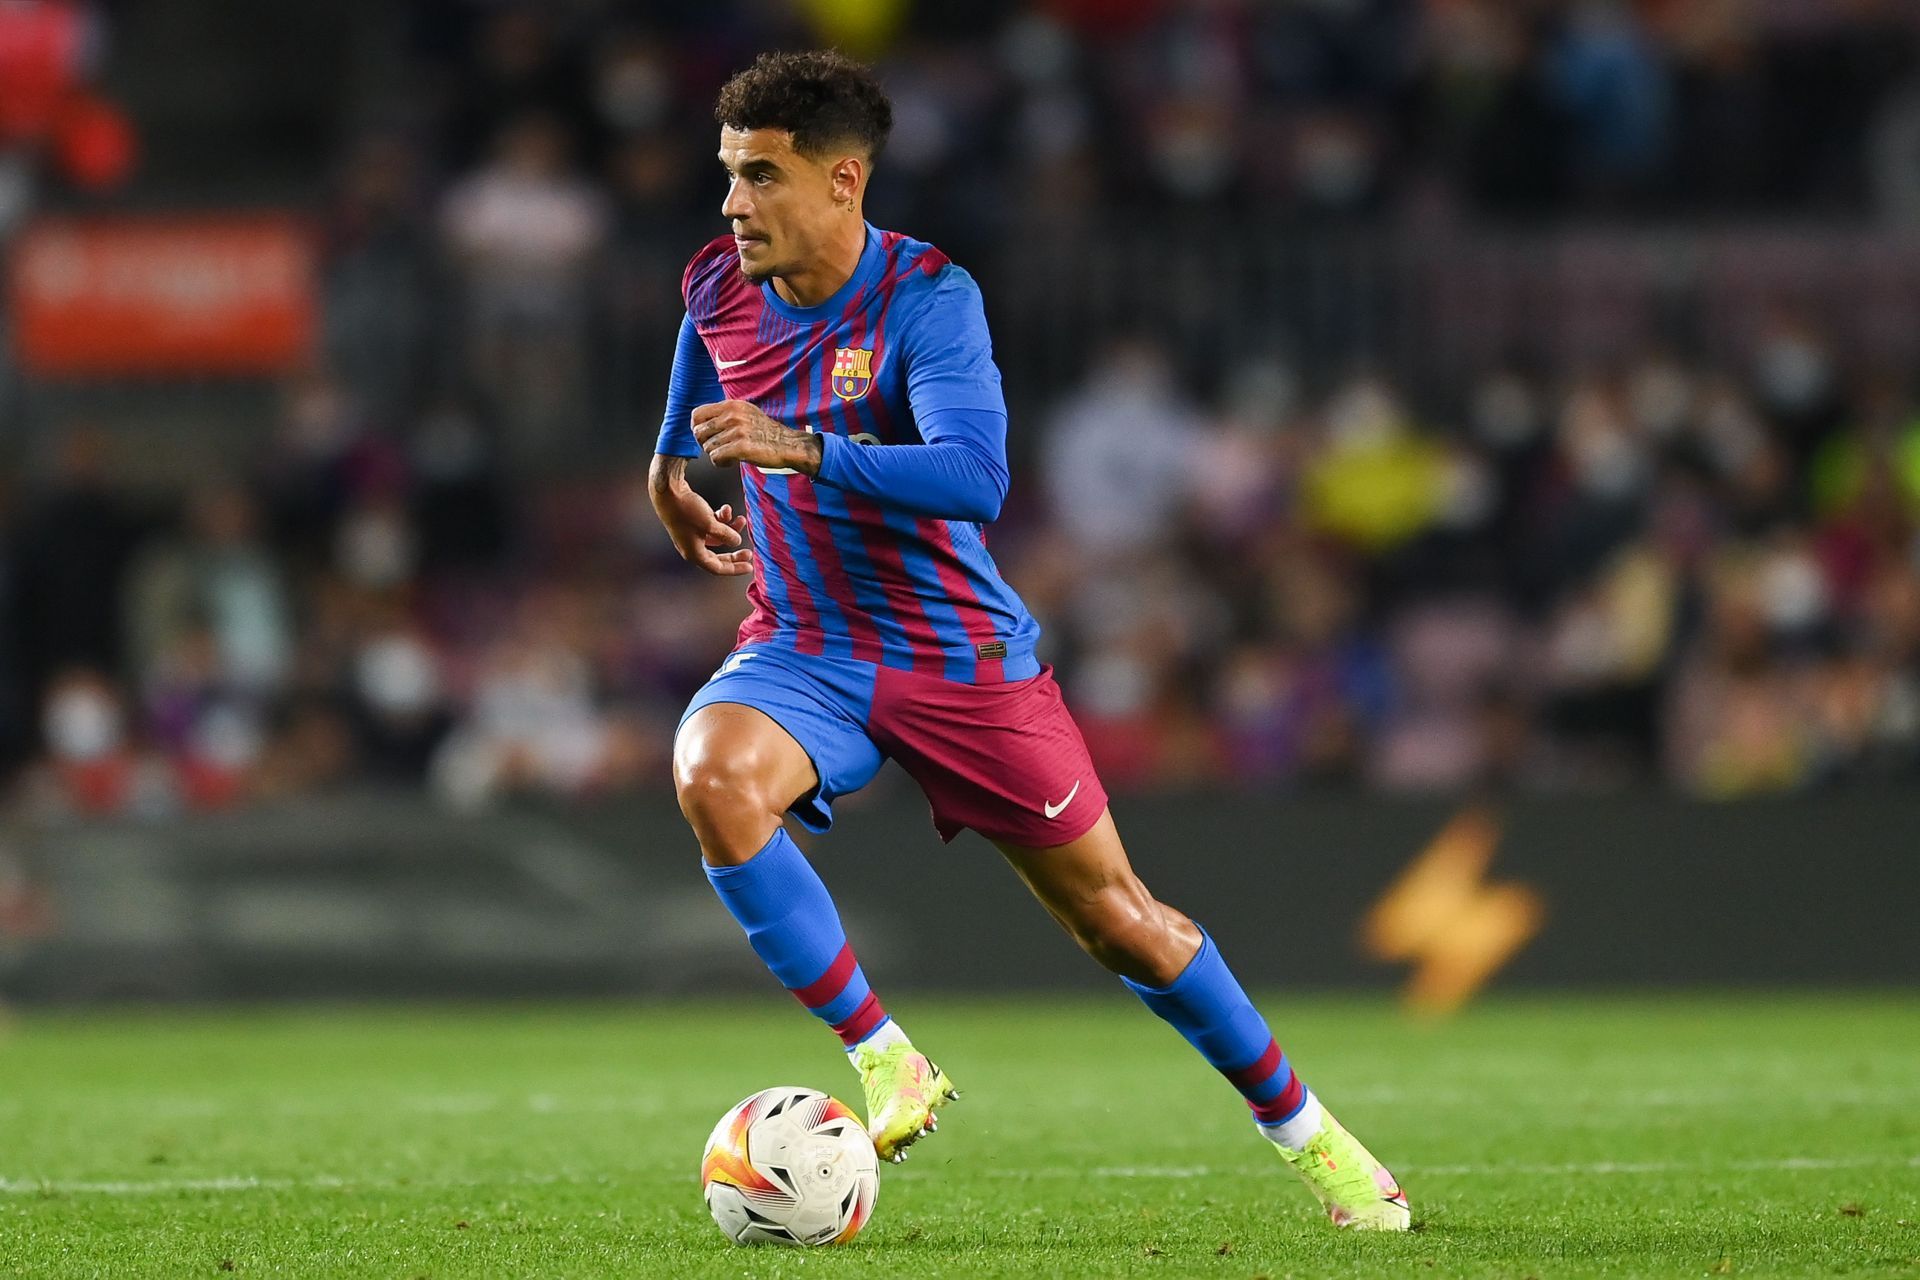 Phillipe Coutinho might yet be able to salvage his Barcelona career.